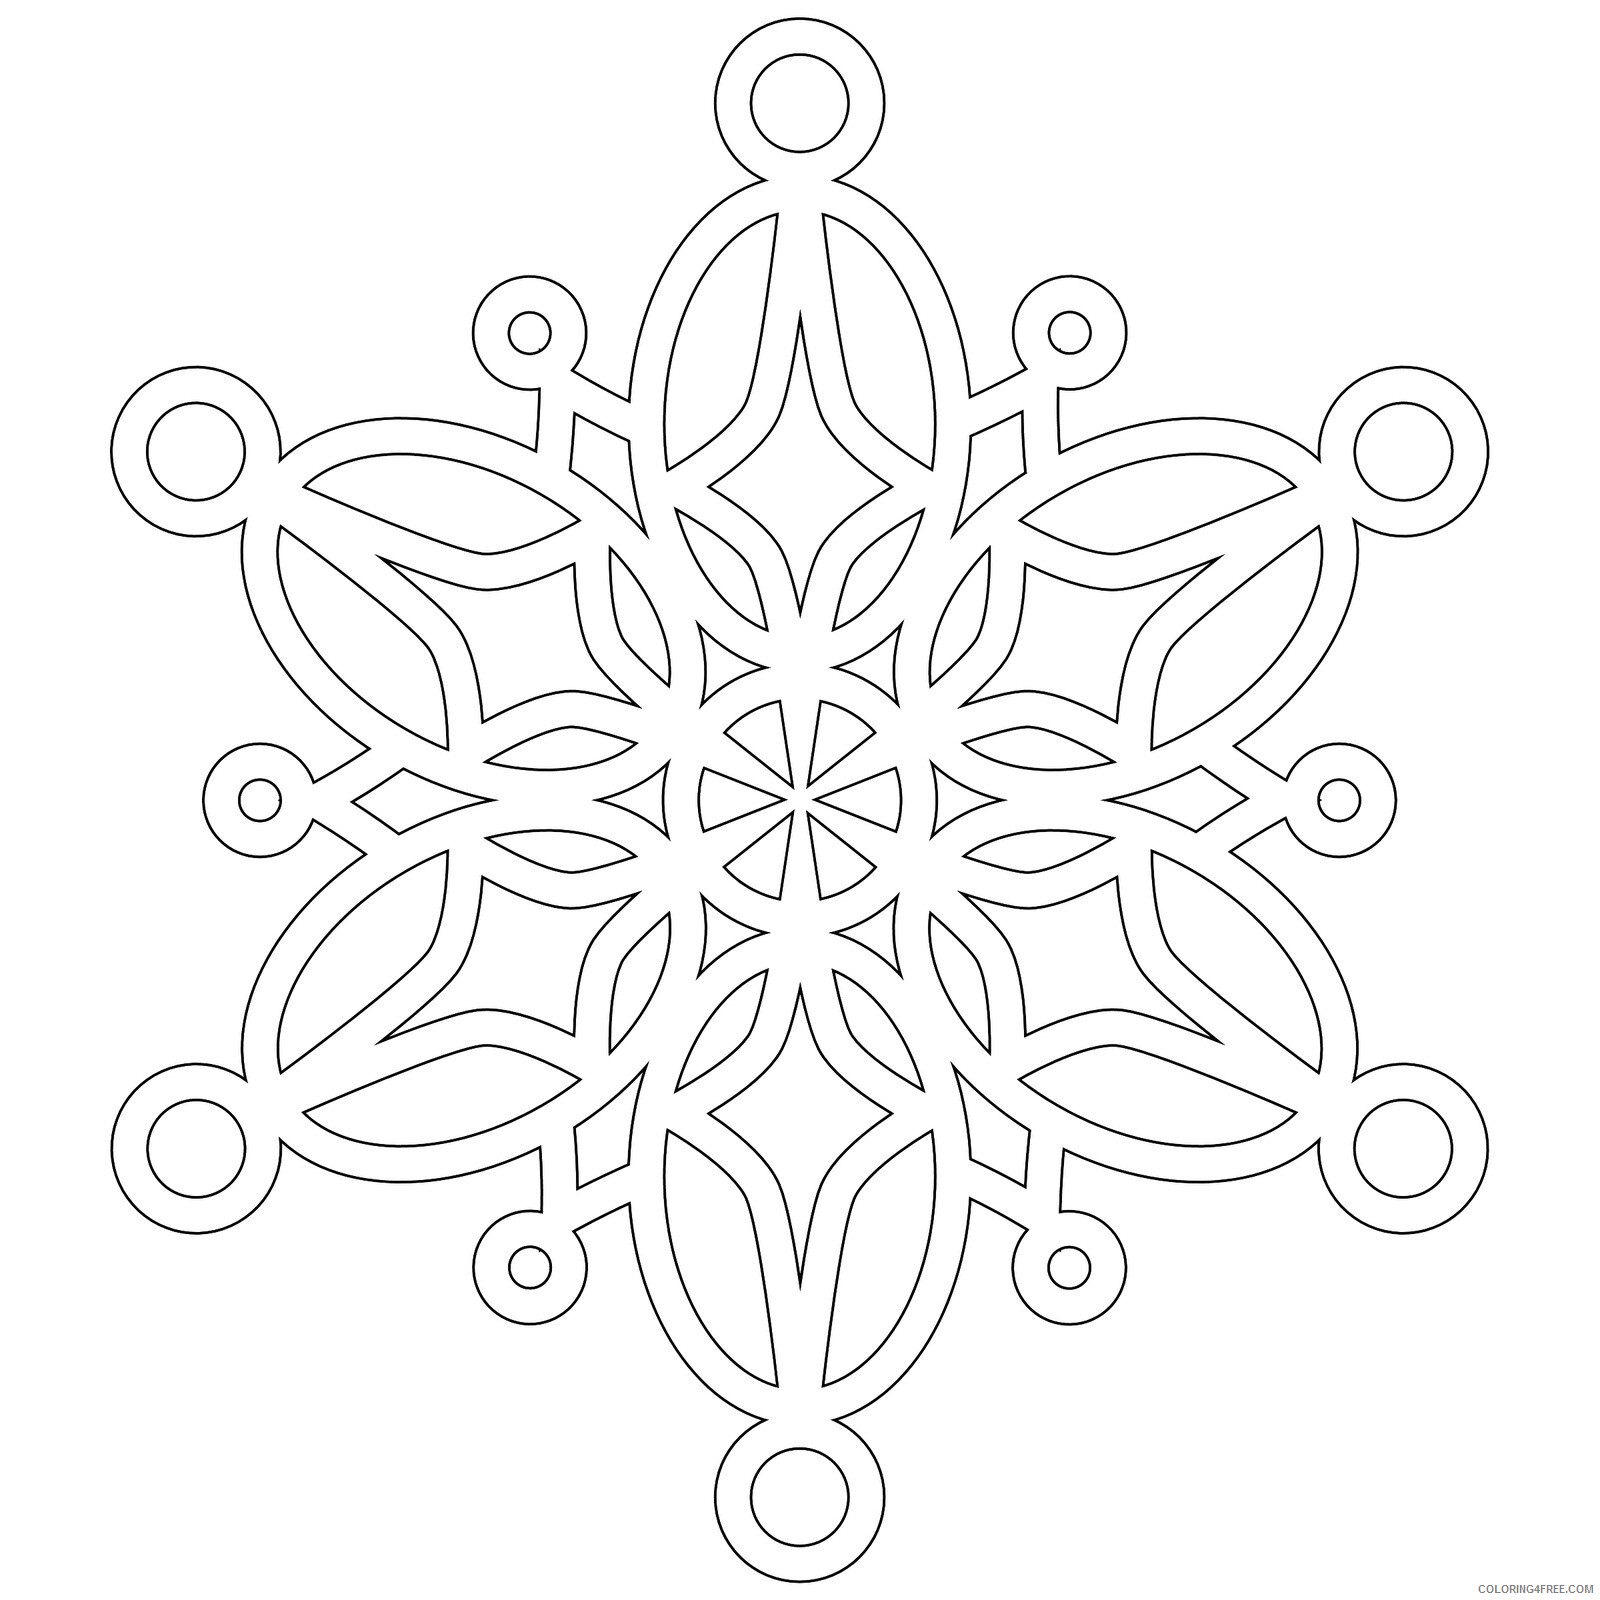 Snowflake Coloring Pages Snowflakes 2 Printable 2021 5512 Coloring4free